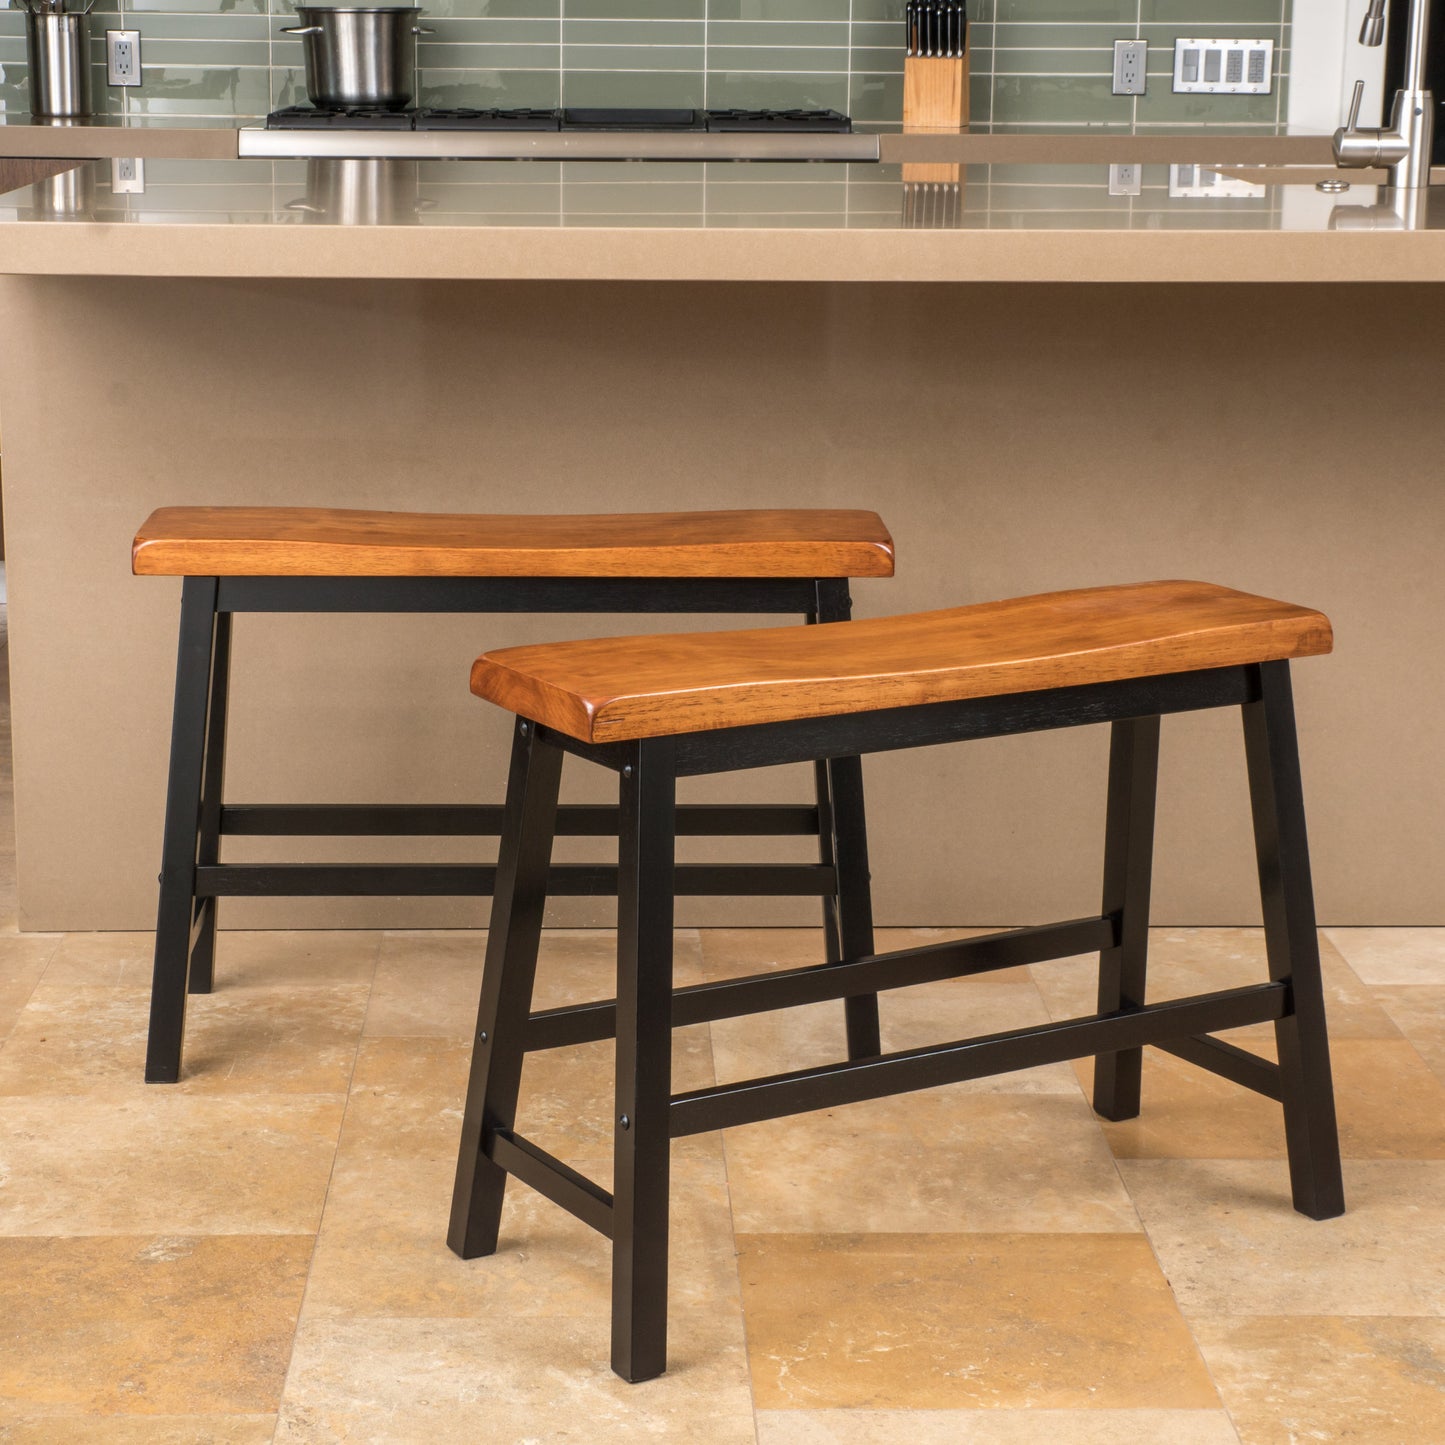 Toluca Saddle Wood 24-Inch Counter Dining Bench (Set of 2)